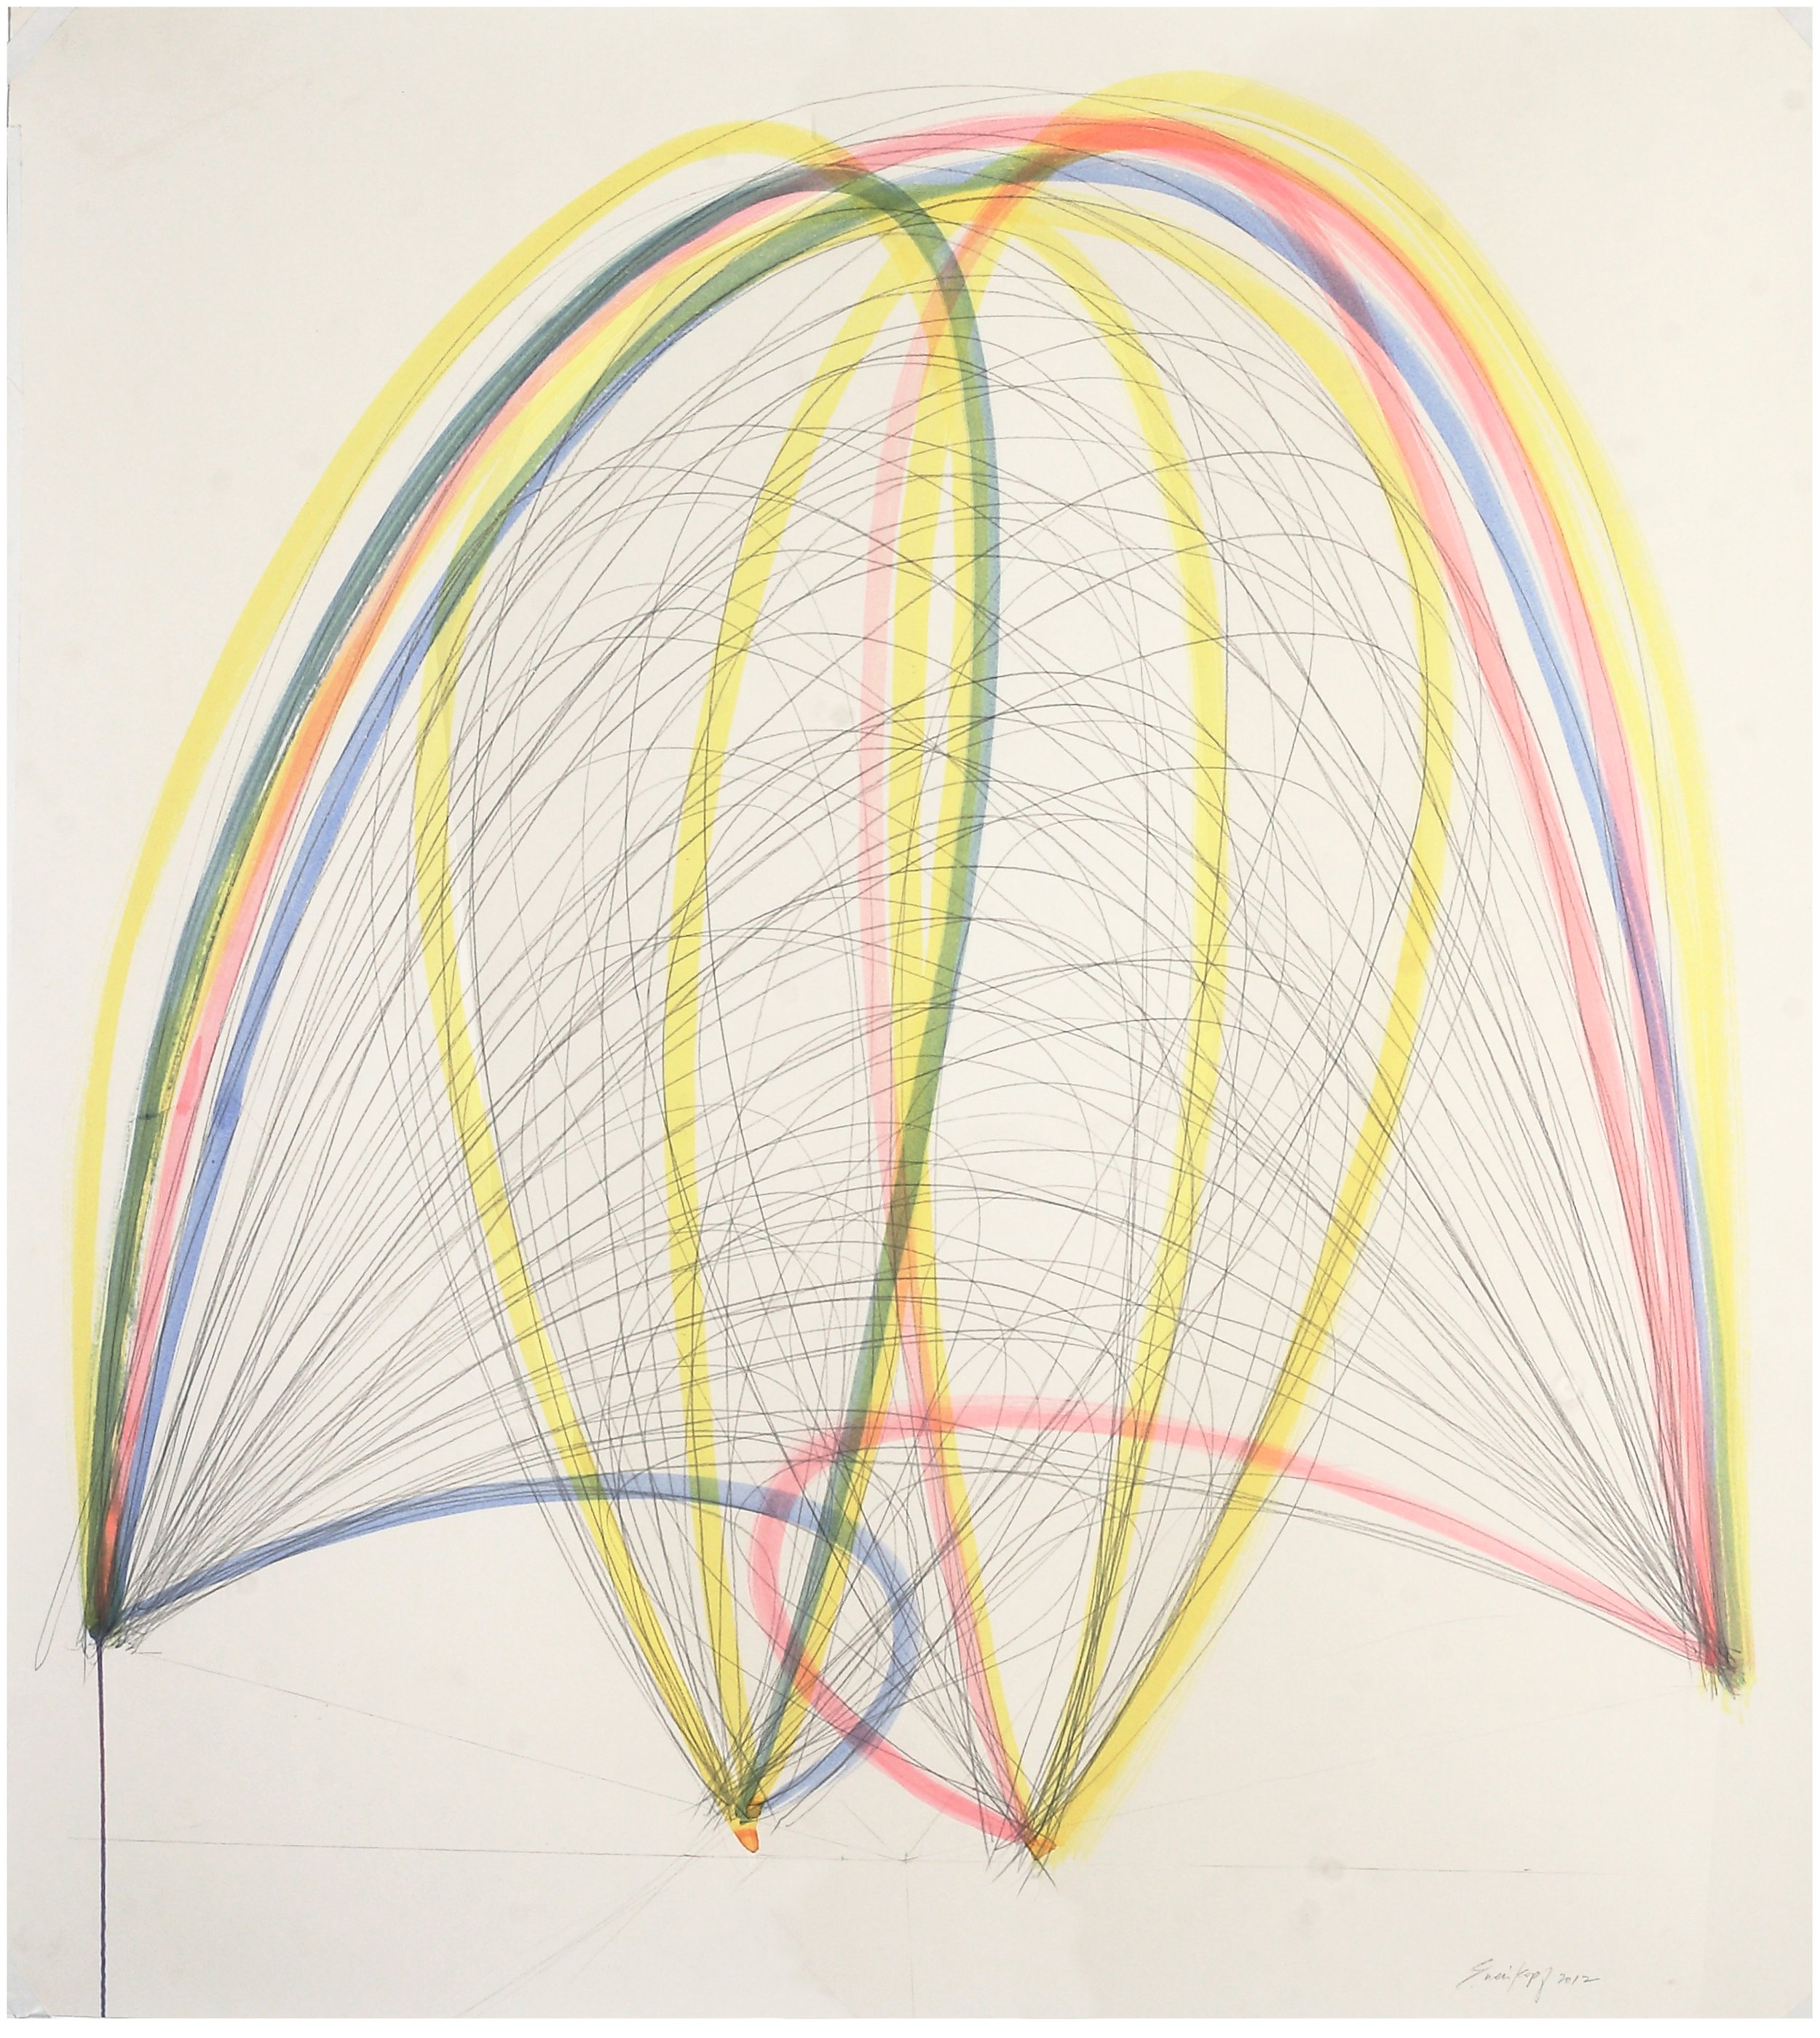   parachute,  watercolor, graphite on paper 30 x 22 in 